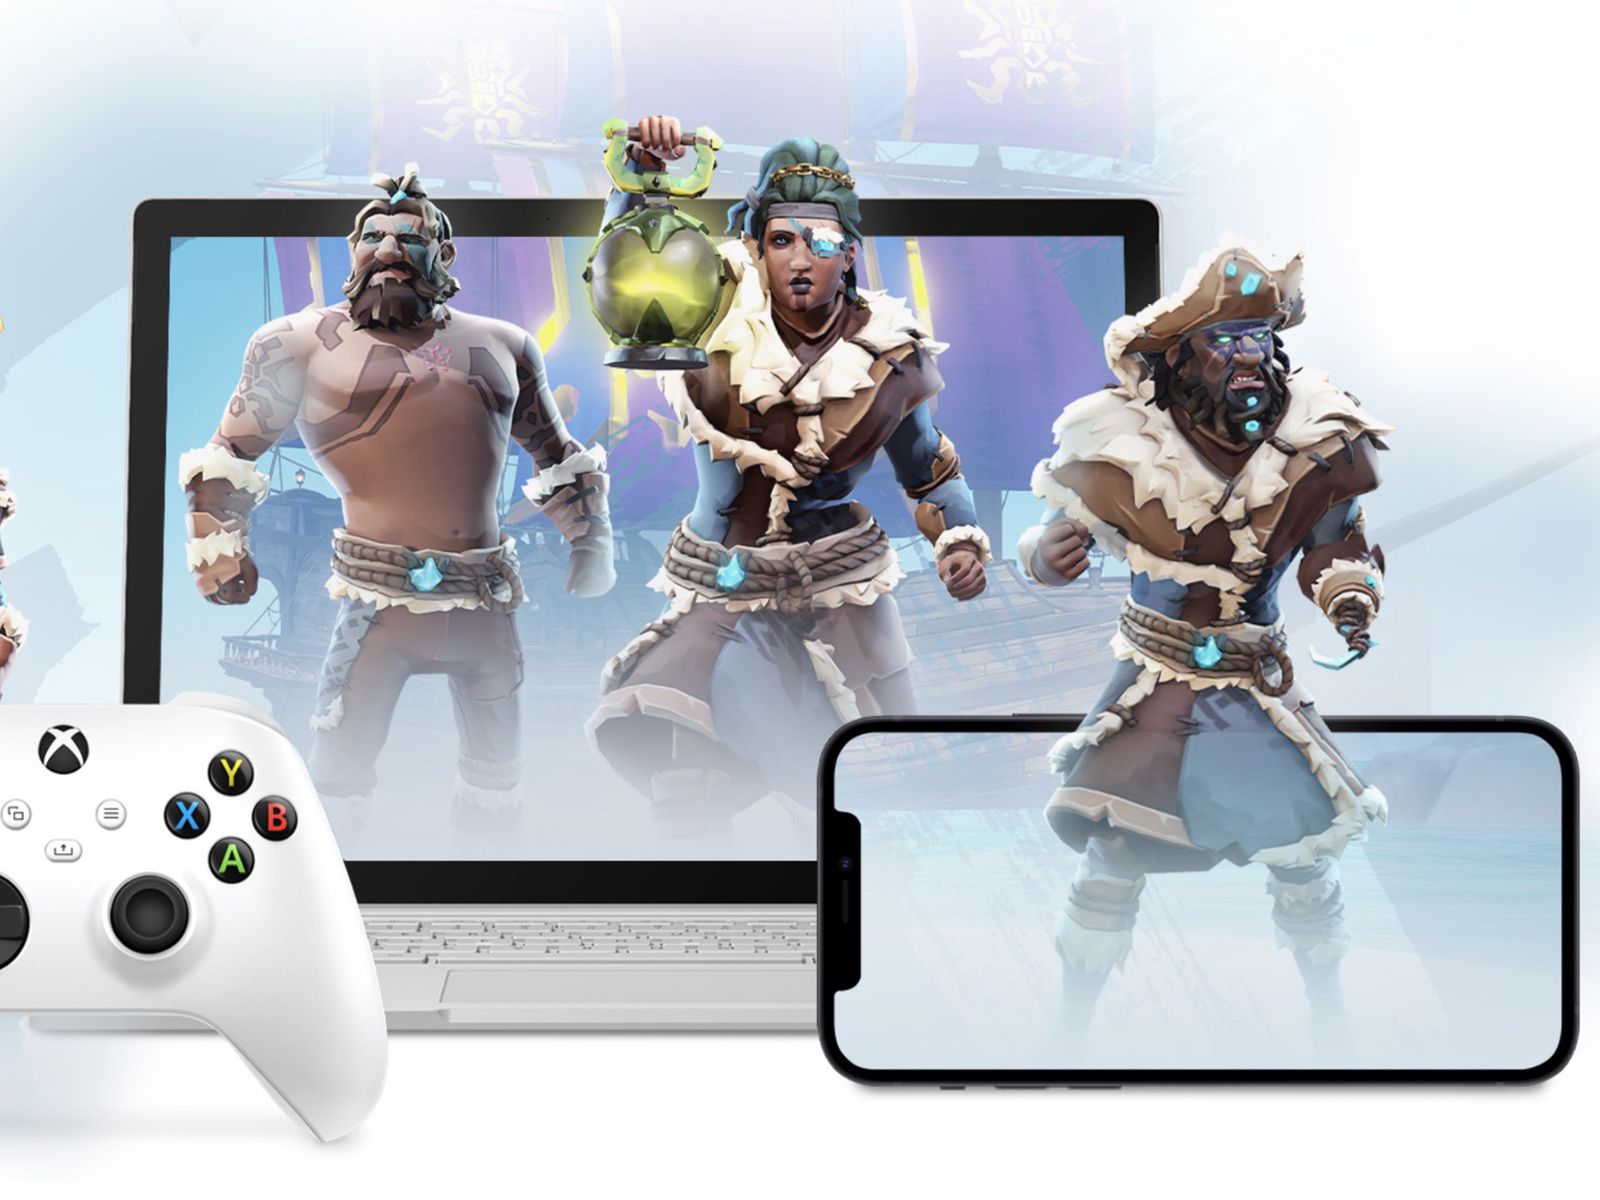 Fortnite is playable on iOS devices again thanks to Xbox Cloud Gaming